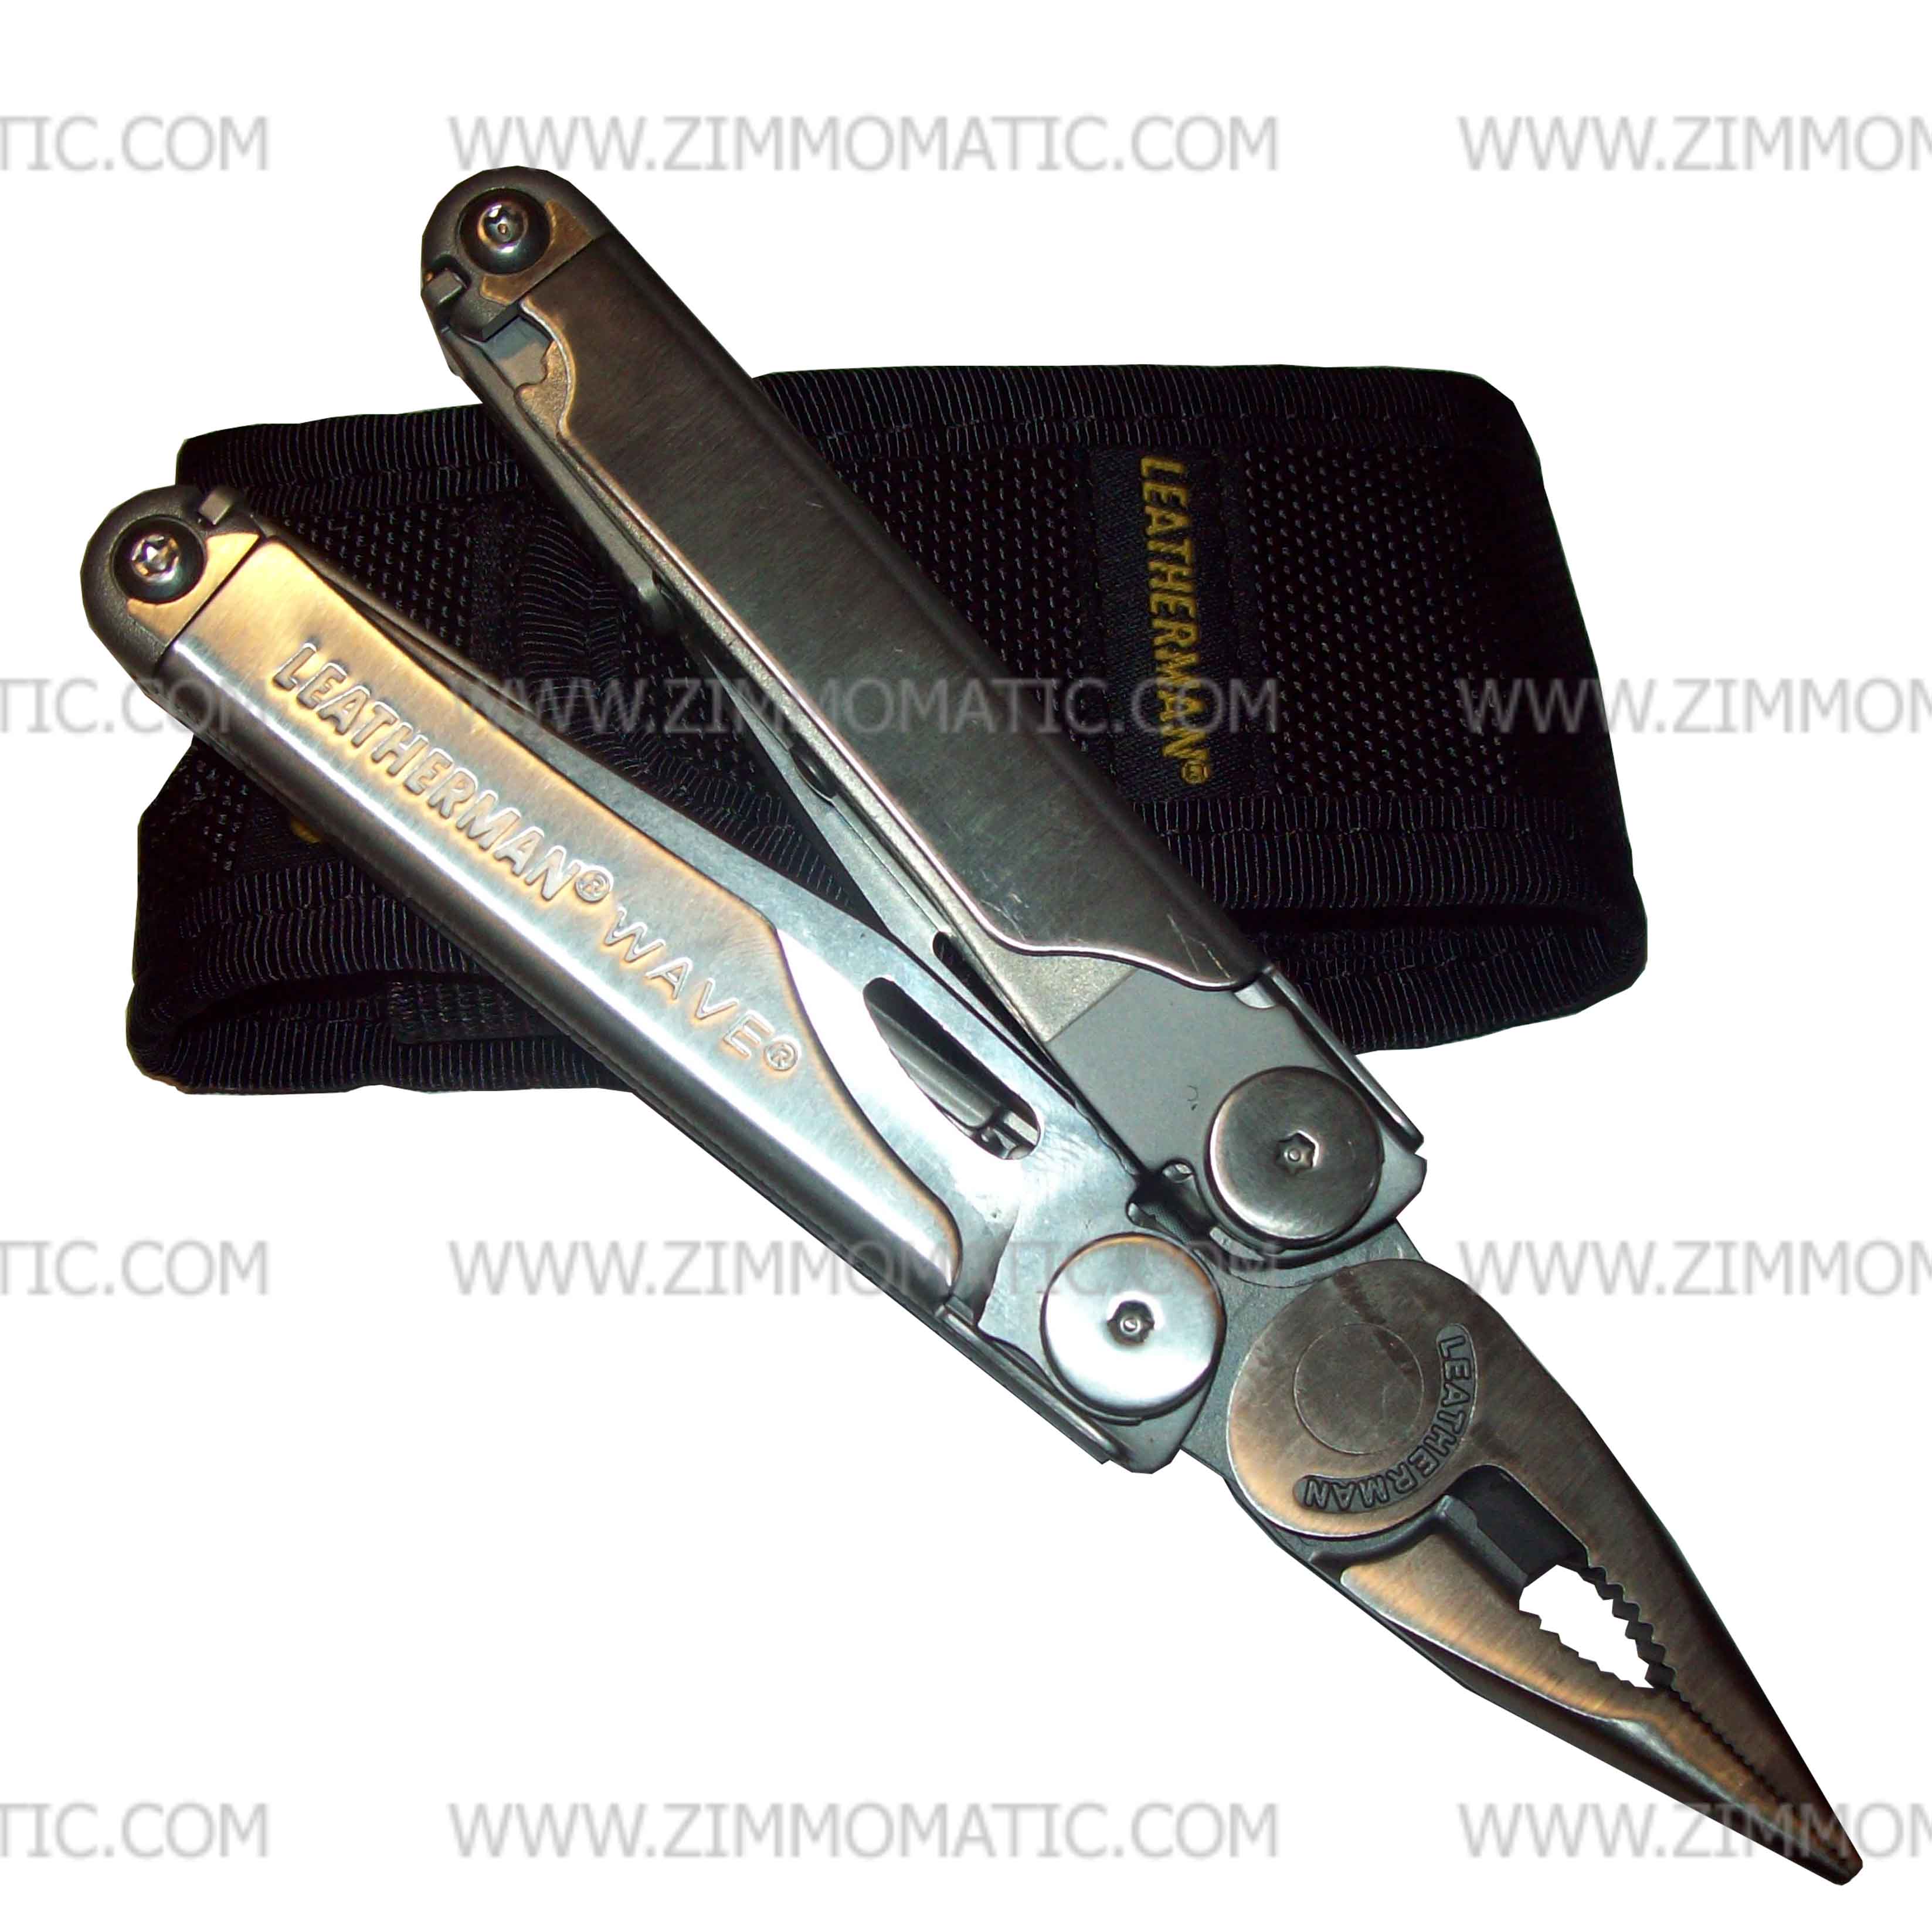 Leatherman wave multi-tool, includes 4 knife blades and a screwdriver combo